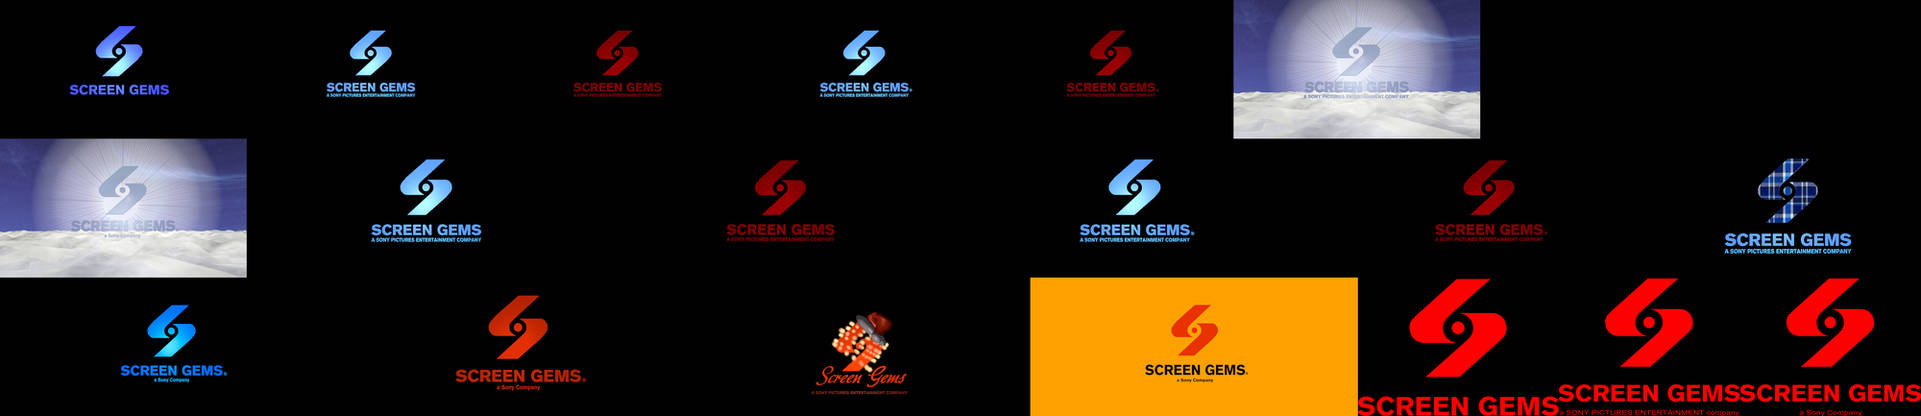 Screen Gems Pictures logo remakes